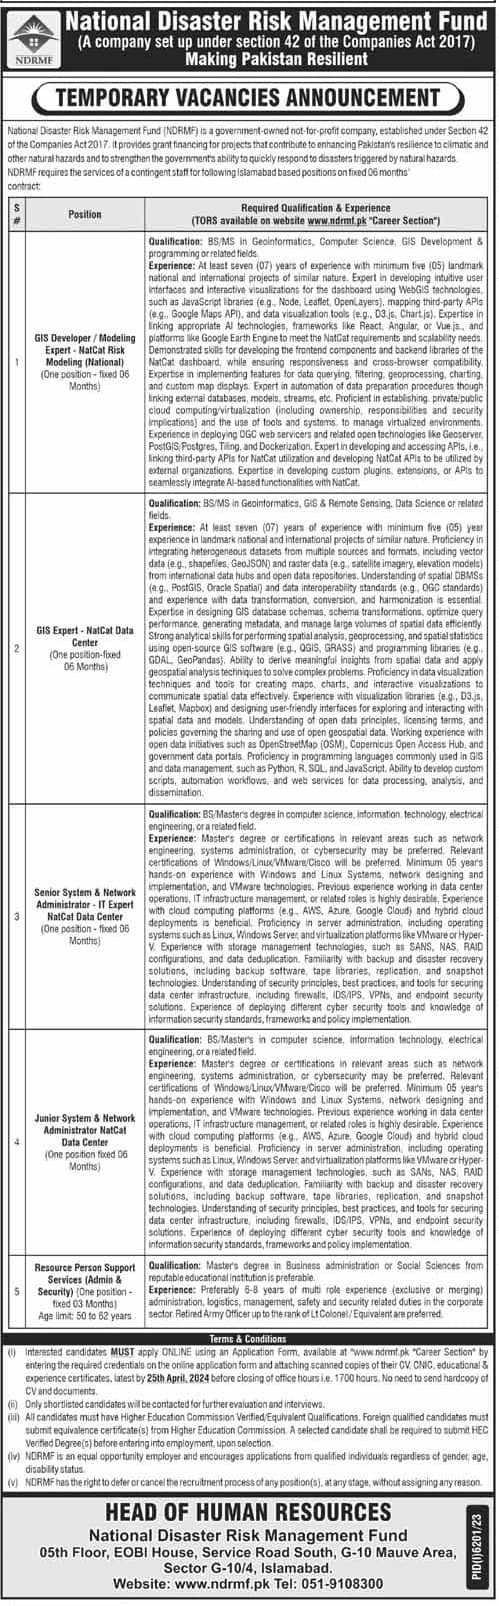 Pakistan Disaster Management Jobs - NDRMF Seeks Temporary Staff. Jobs in National Disaster